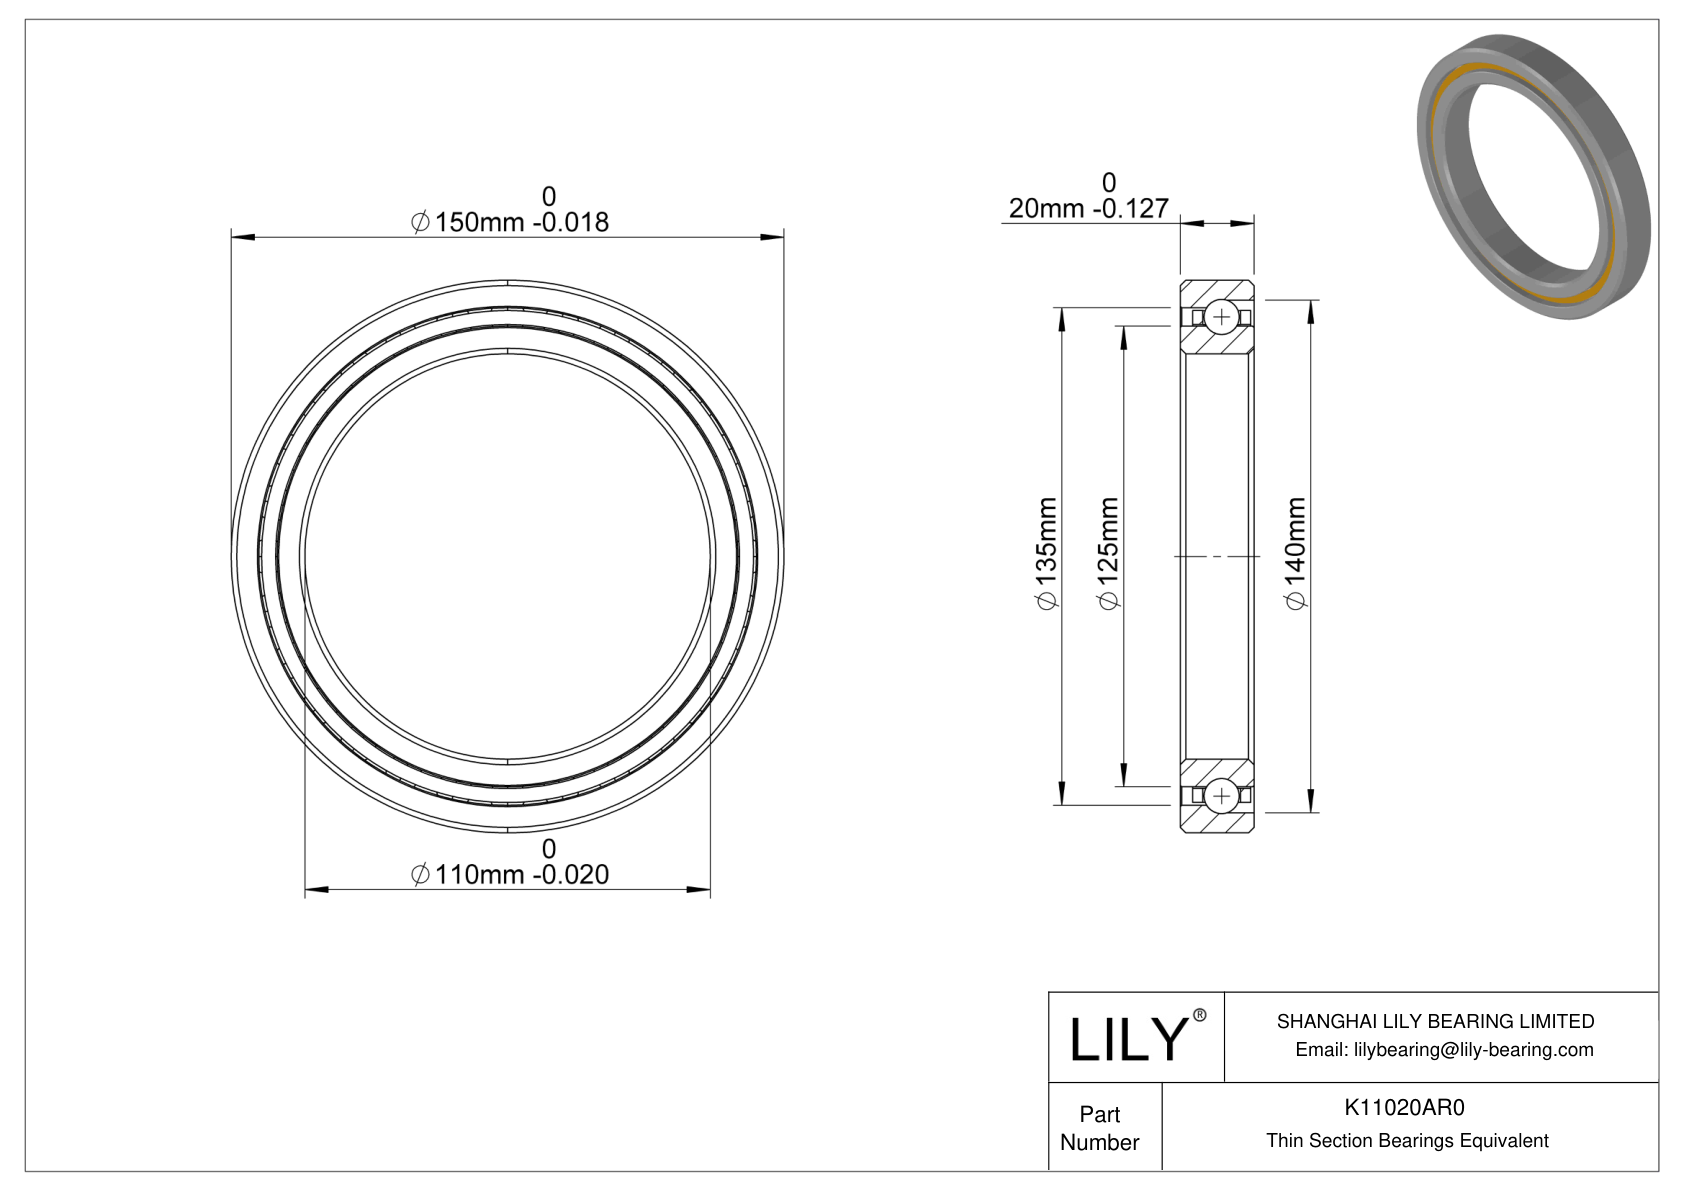 K11020AR0 Constant Section (CS) Bearings cad drawing